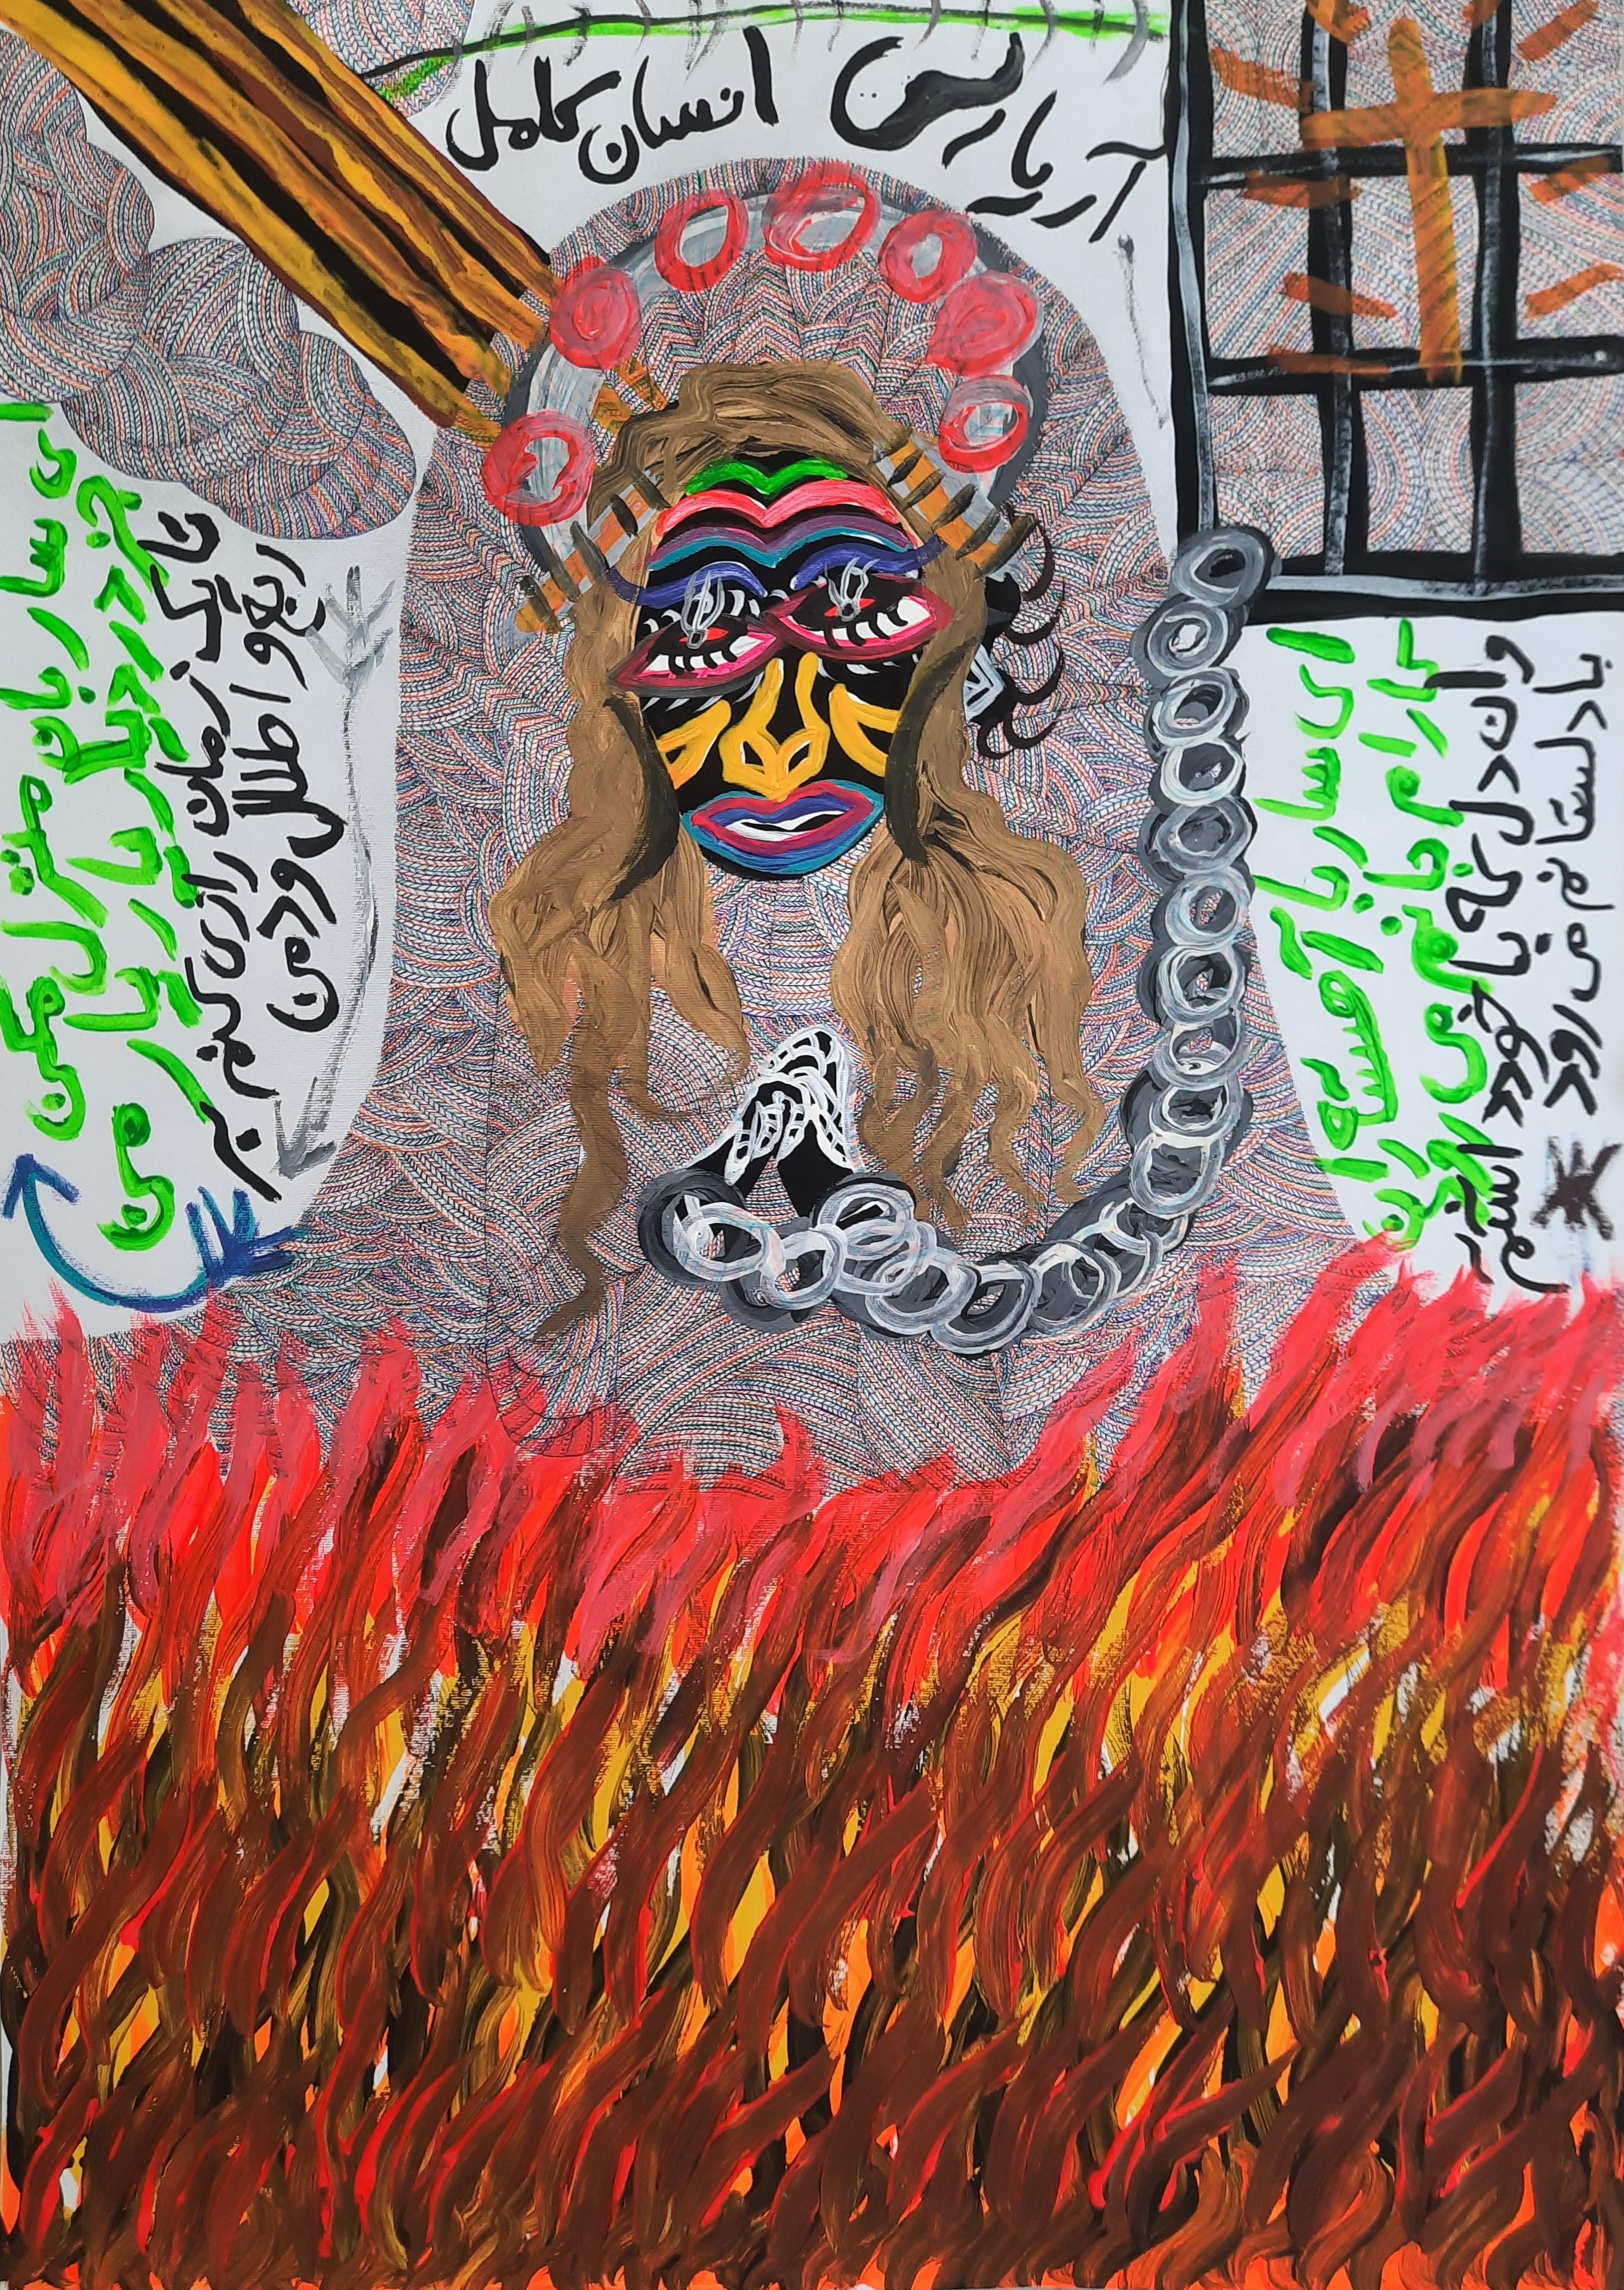 Acrylic paint on paper
Hand-signed on the left

« Here the barbaric or savage ceremonies of New Guinea take on the air of Rio carnival.
Here the vitality bursts and the colors dance the jig while thundering.
A charivari of African masks, children's